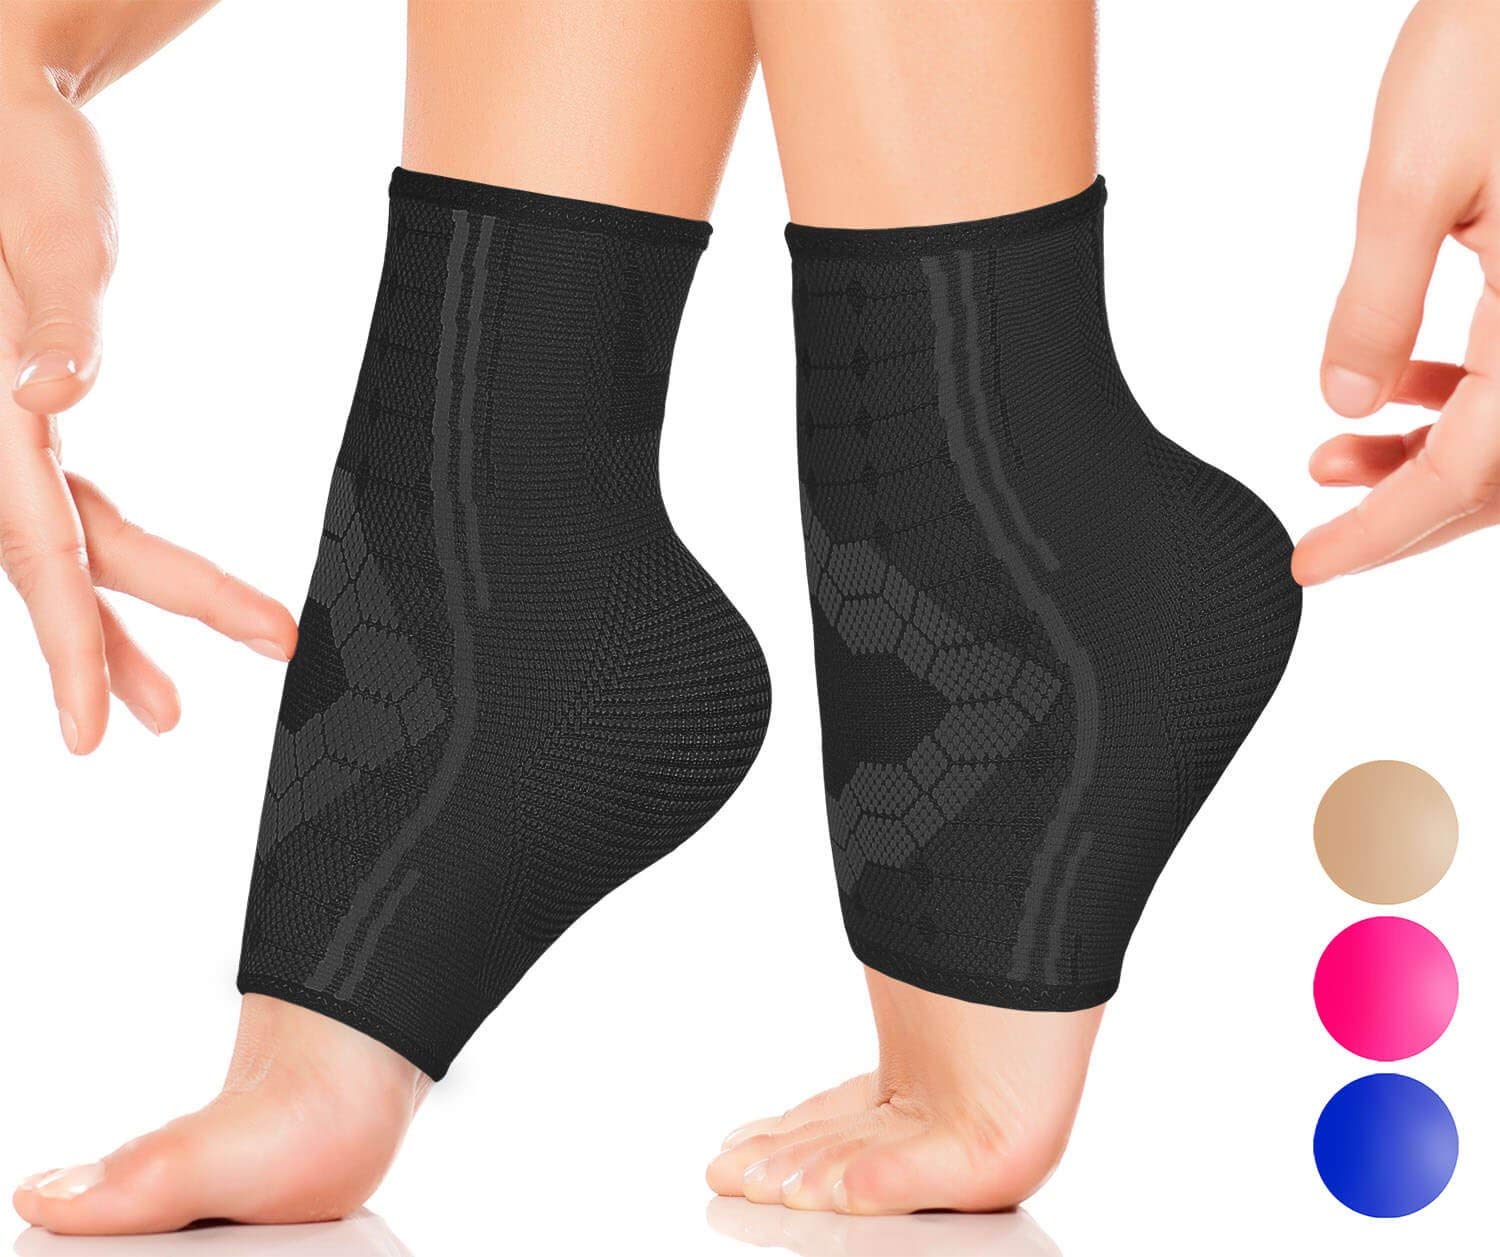 Ankle Compression Sleeves – Sparthos Instructions